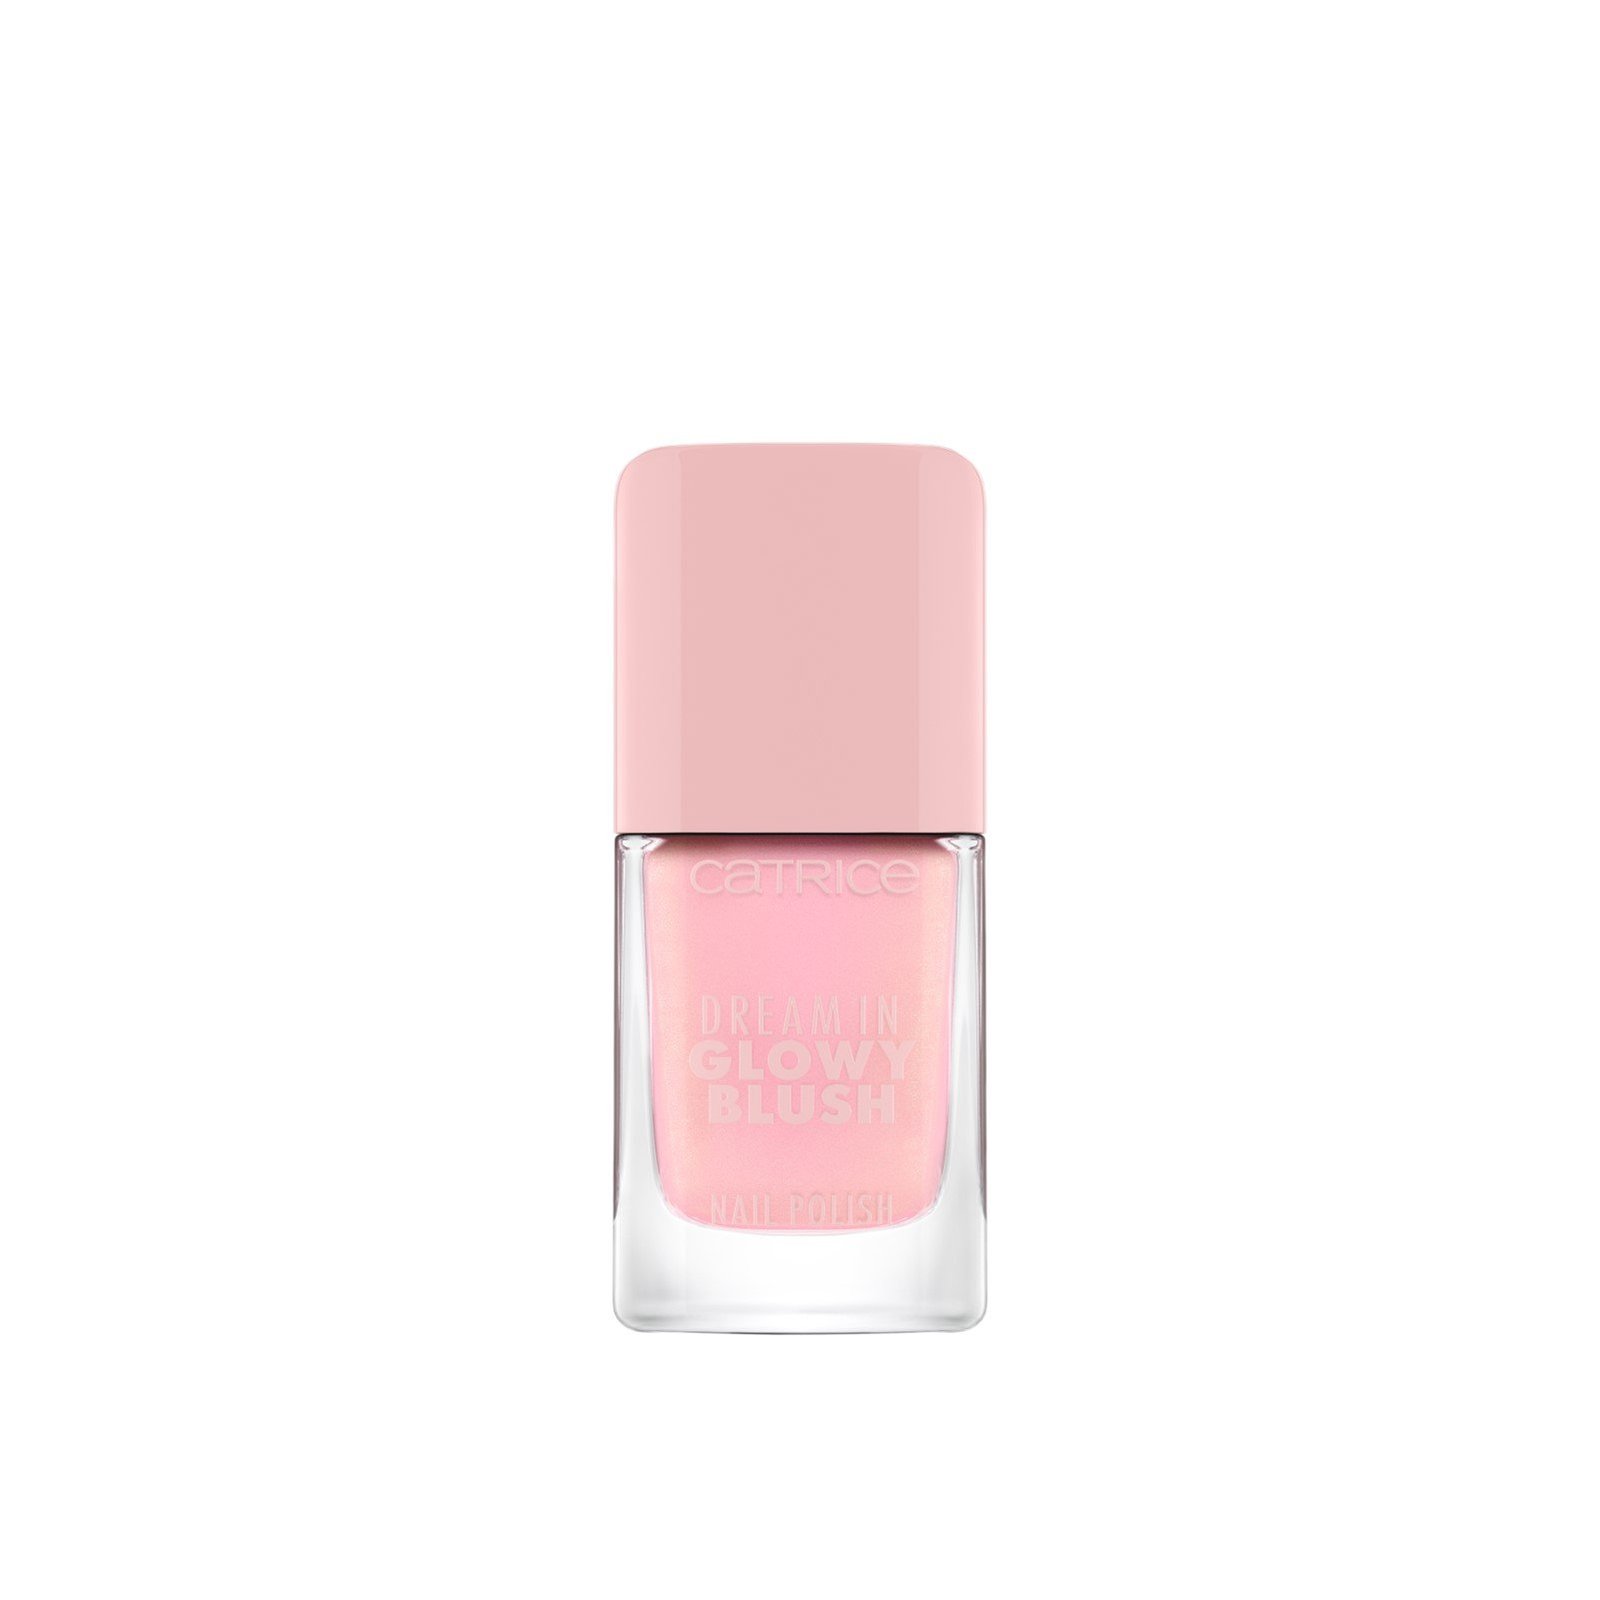 Catrice Dream In Glowy Blush Nail Polish 080 Rose Side Of Life 10.5ml